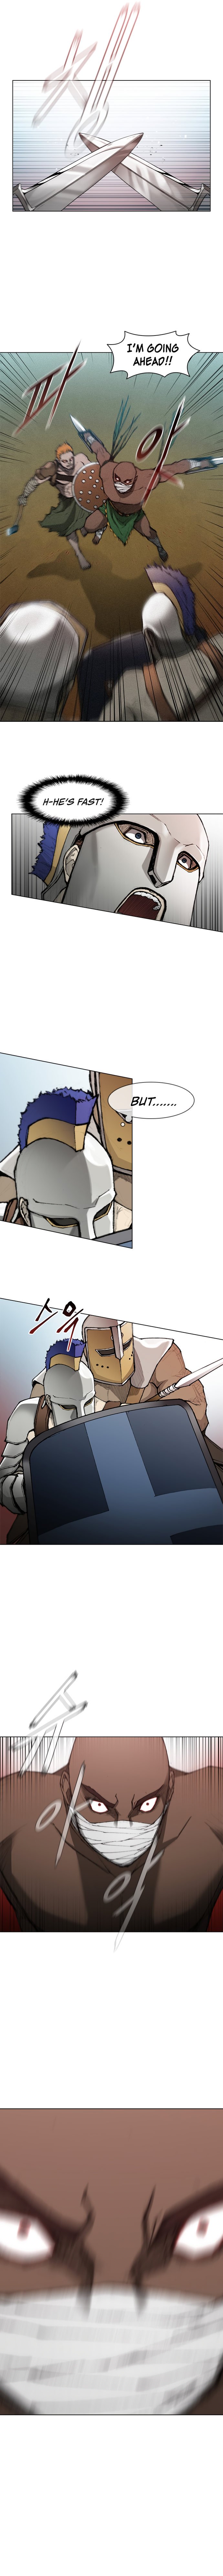 long-way-of-the-warrior-chap-39-6